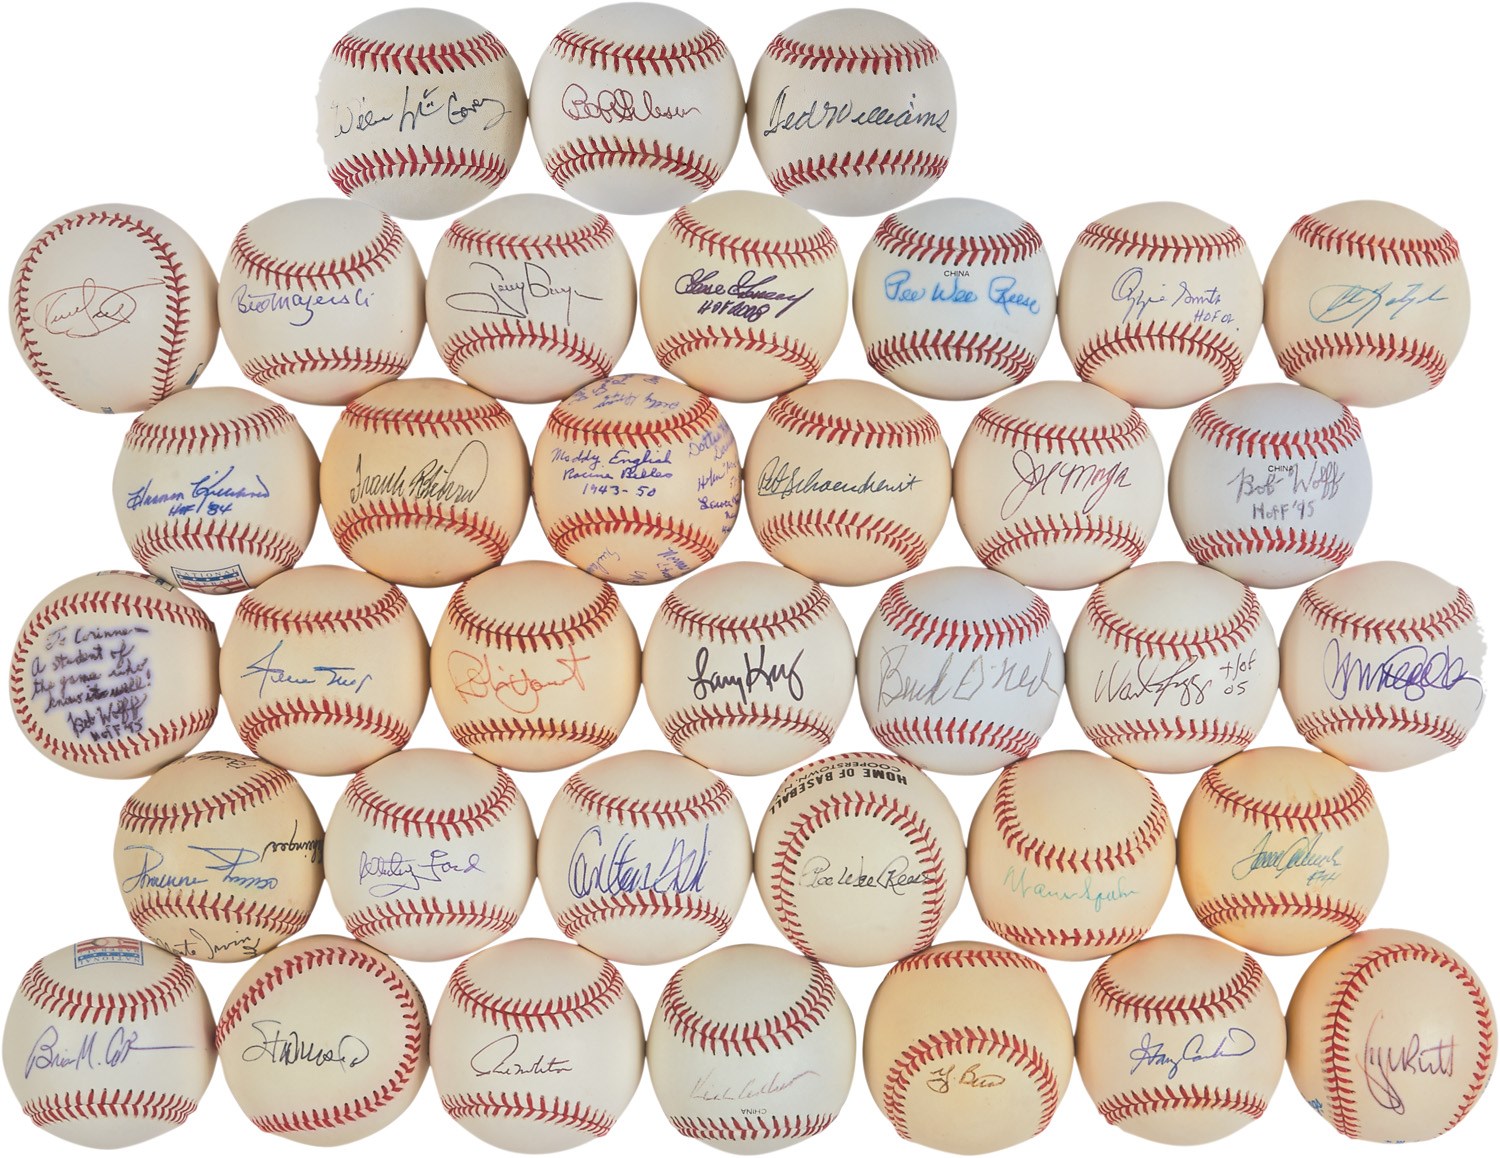 Baseball Autographs - "Hall of Fame" Single-Signed Baseball Collection from Cooperstown Employee (300+)